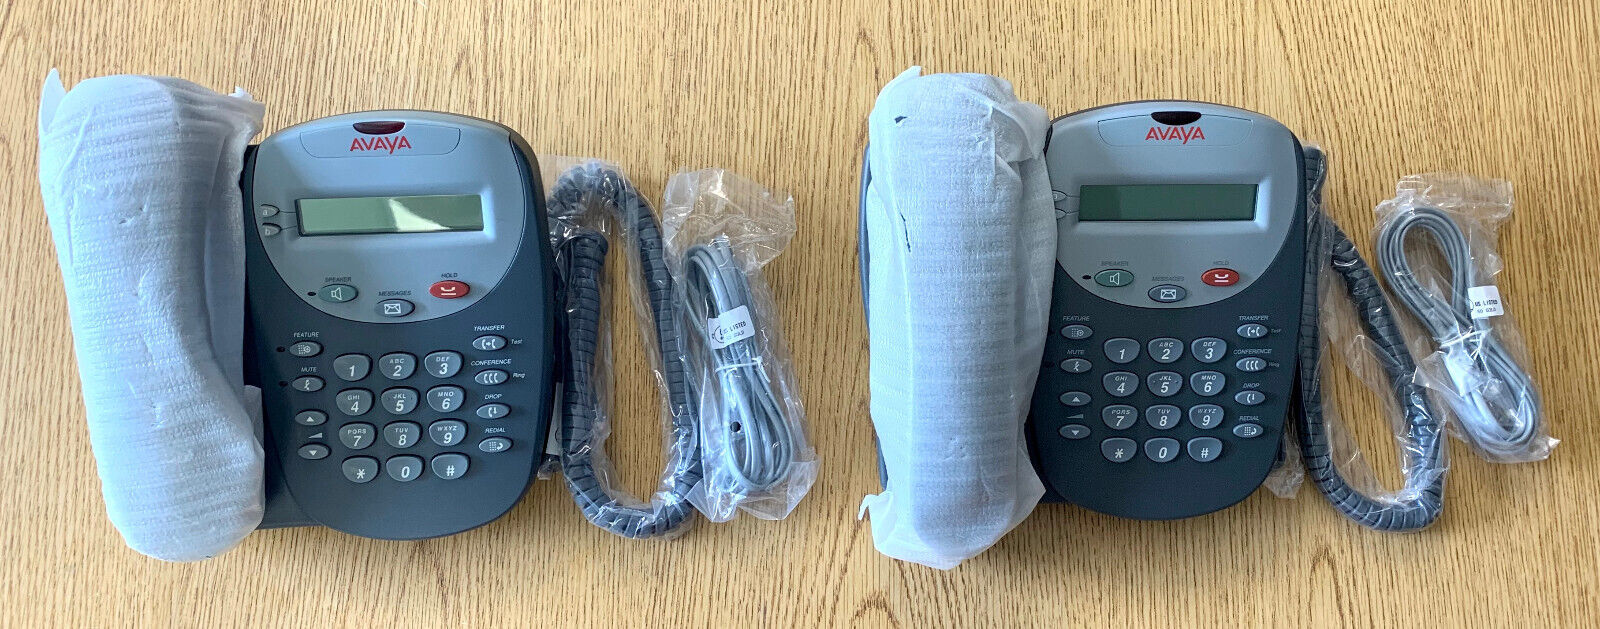 Lot of 2 Avaya 5402 Digital Phones, 700345309, Cleaned and Tested